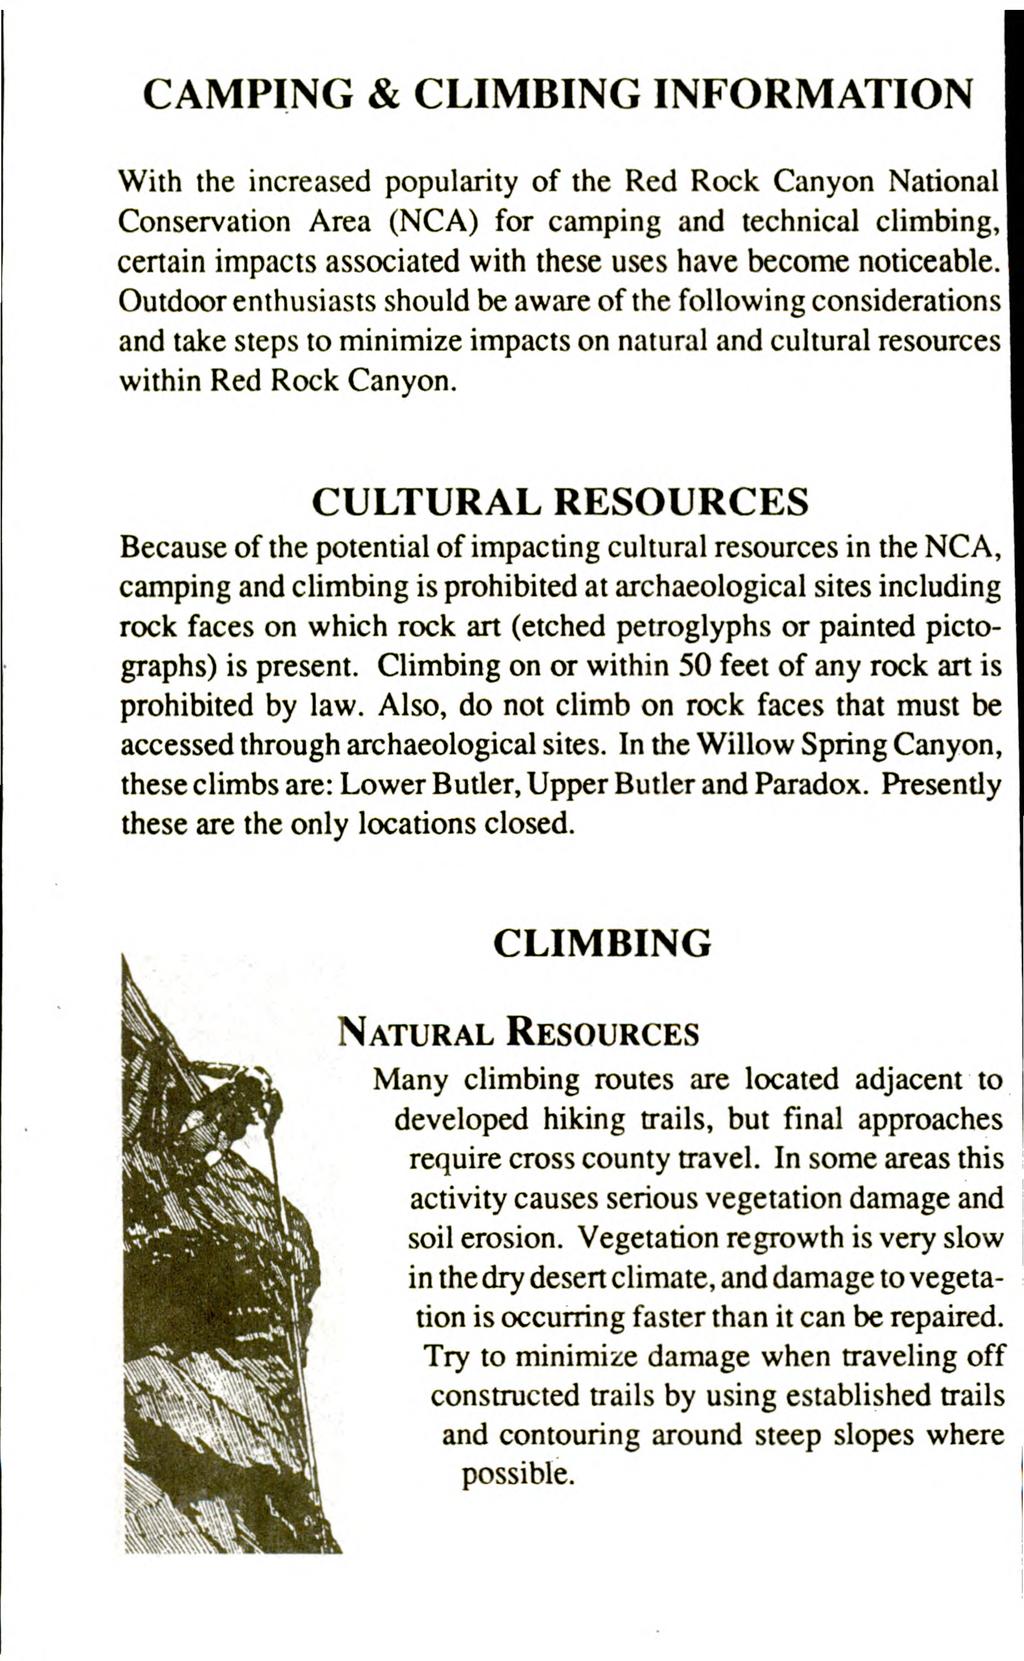 CAMPING & CLIMBING INFORMATION With the increased popularity of the Red Rock Canyon National Conservation Area (NCA) for camping and technical climbing, certain impacts associated with these uses